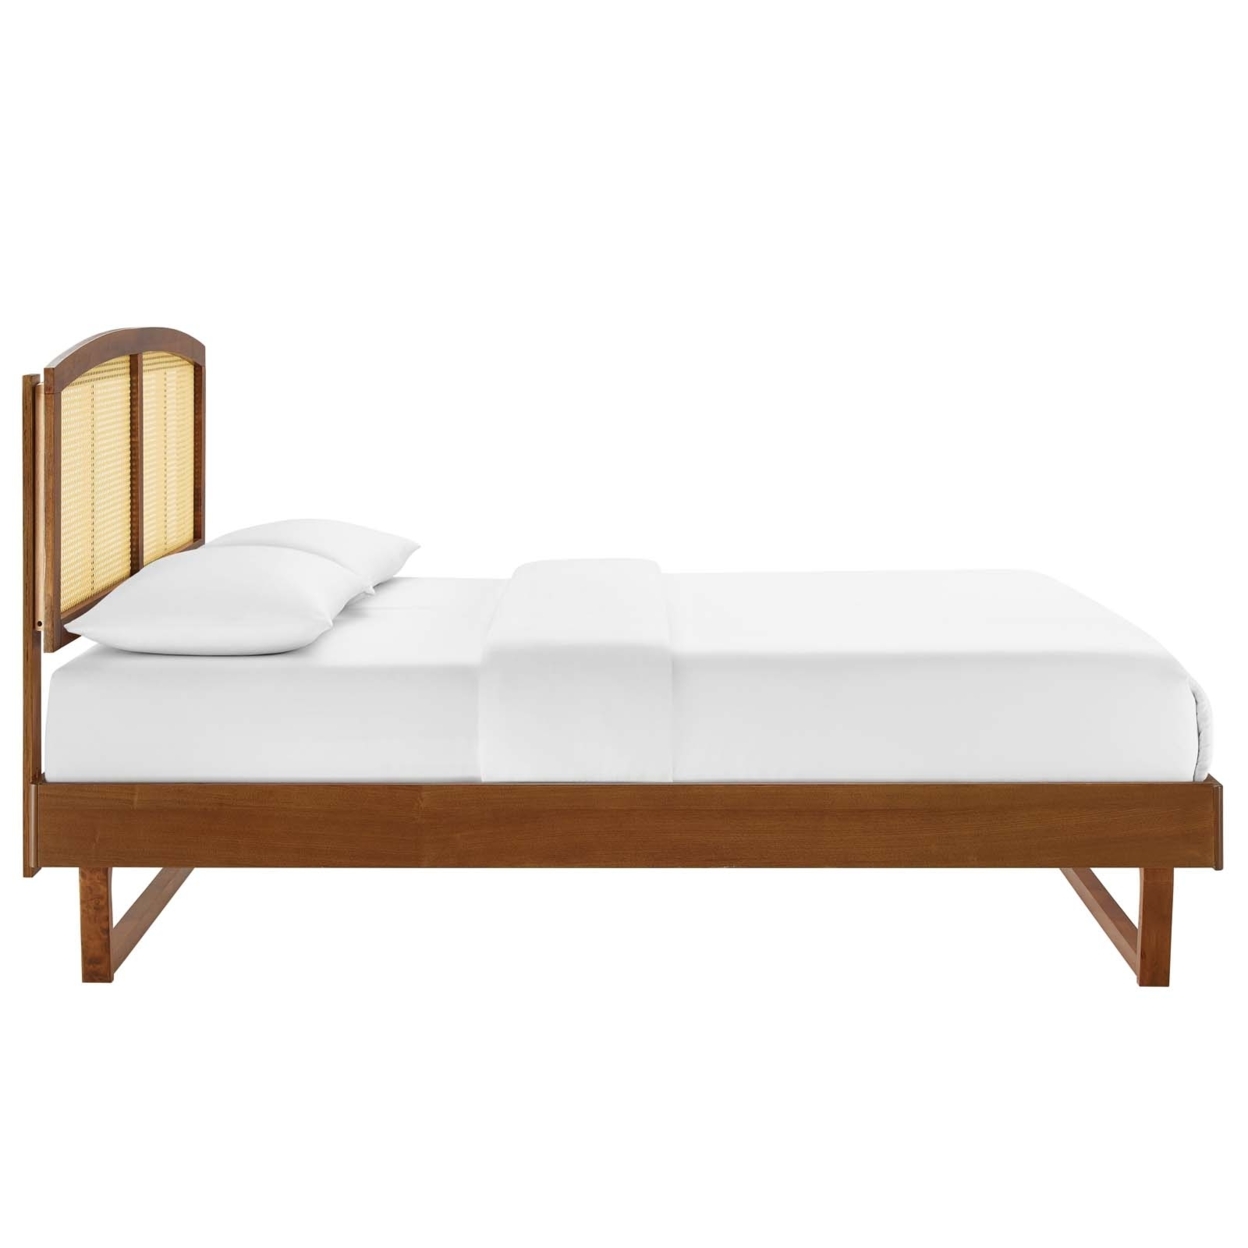 Sierra Cane And Wood Queen Platform Bed With Angular Legs, Walnut